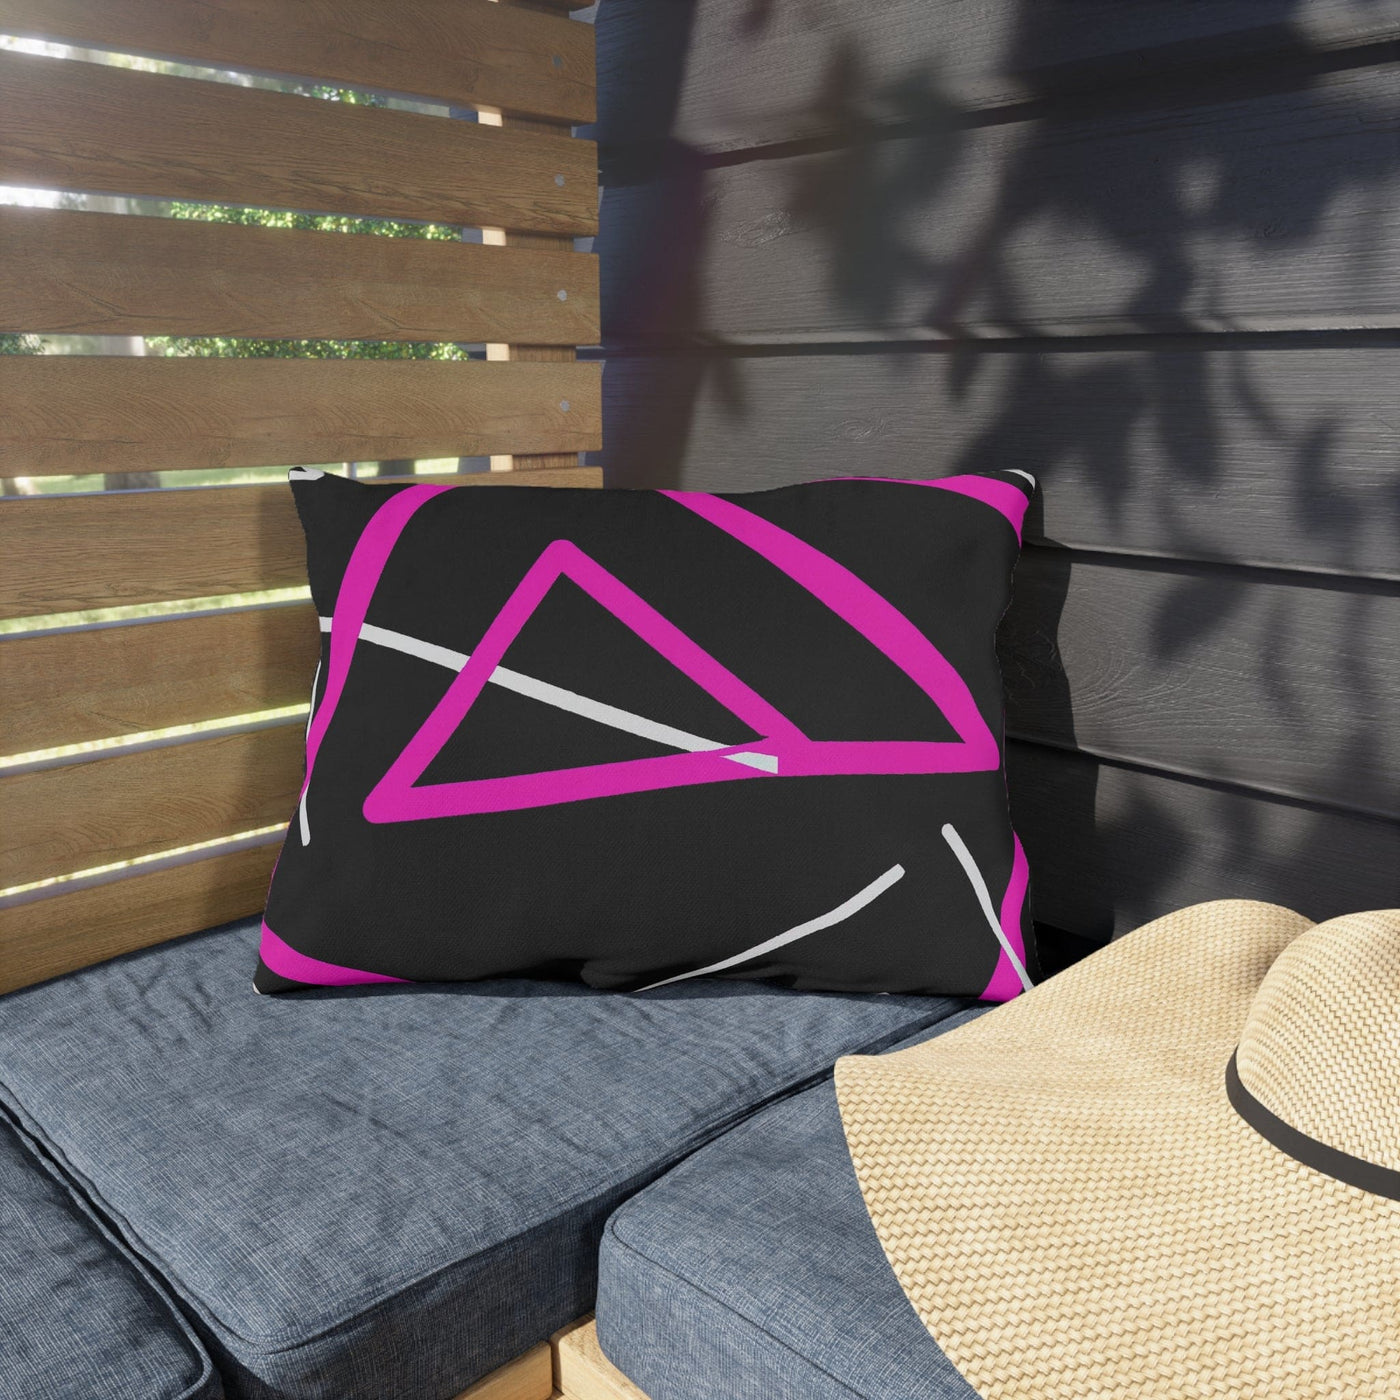 Decorative Outdoor Pillows With Zipper - Set Of 2 Black And Pink Geometric